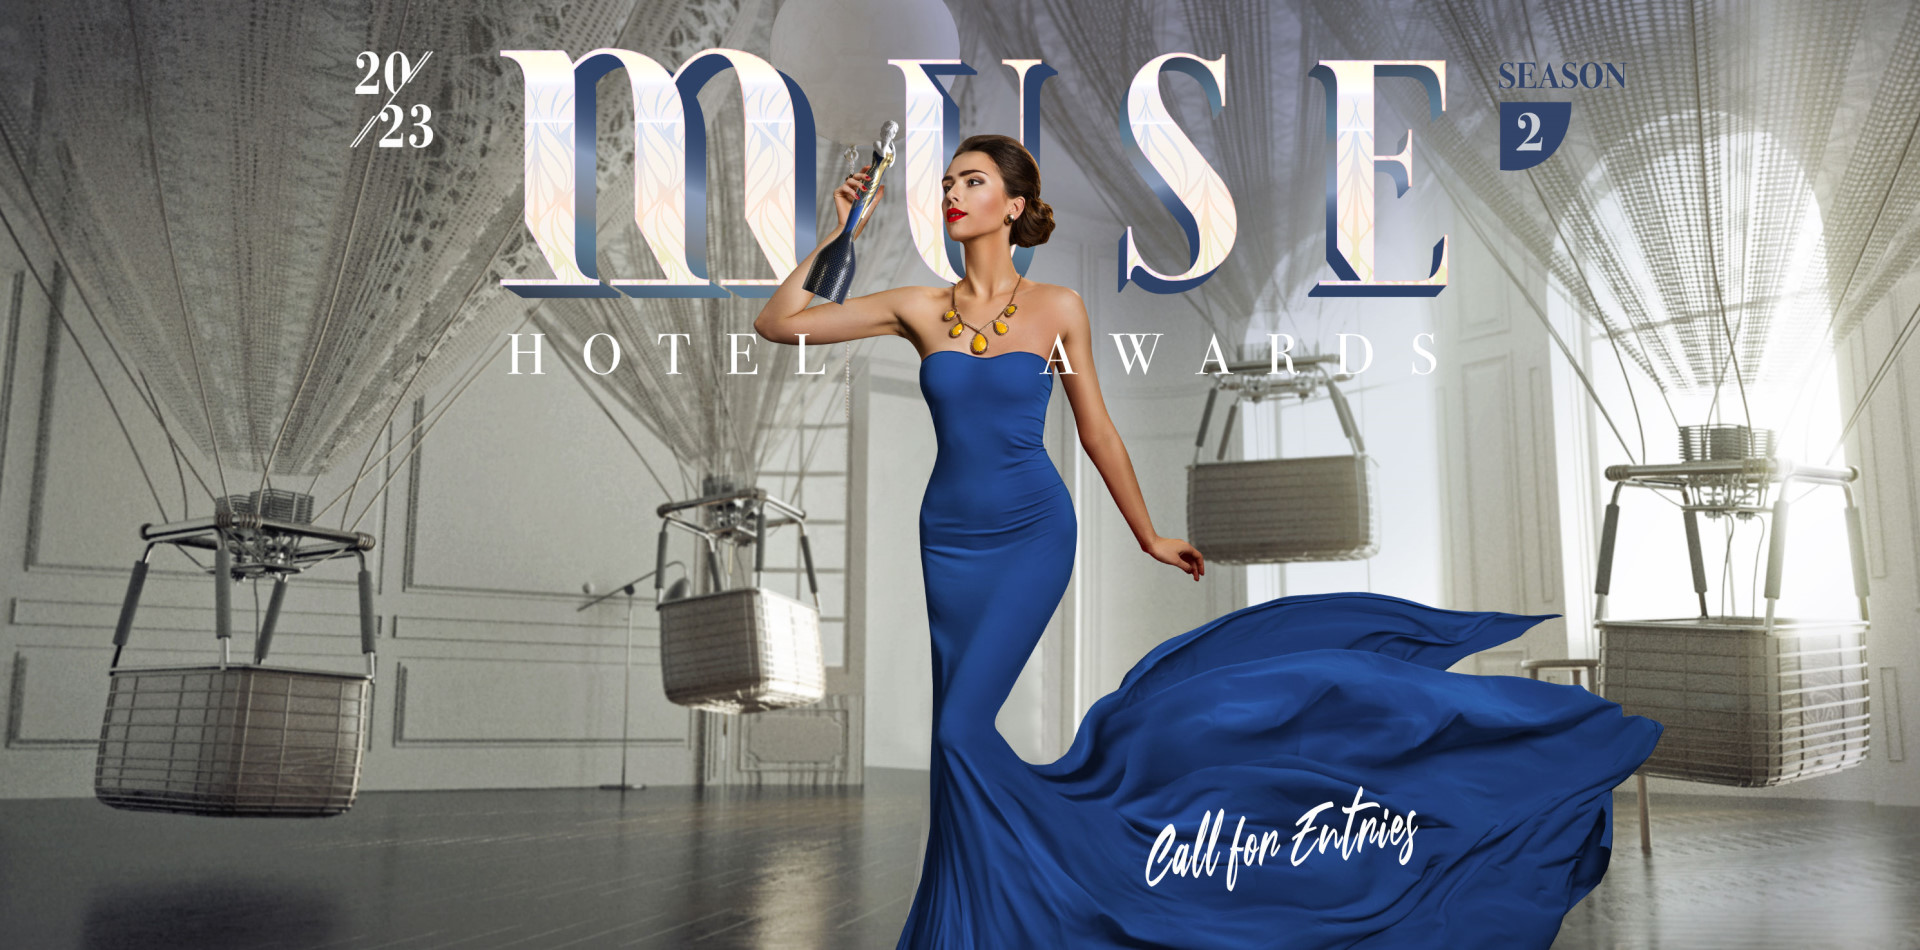 2023 MUSE Hotel Awards: Season 2 is now open for entries!